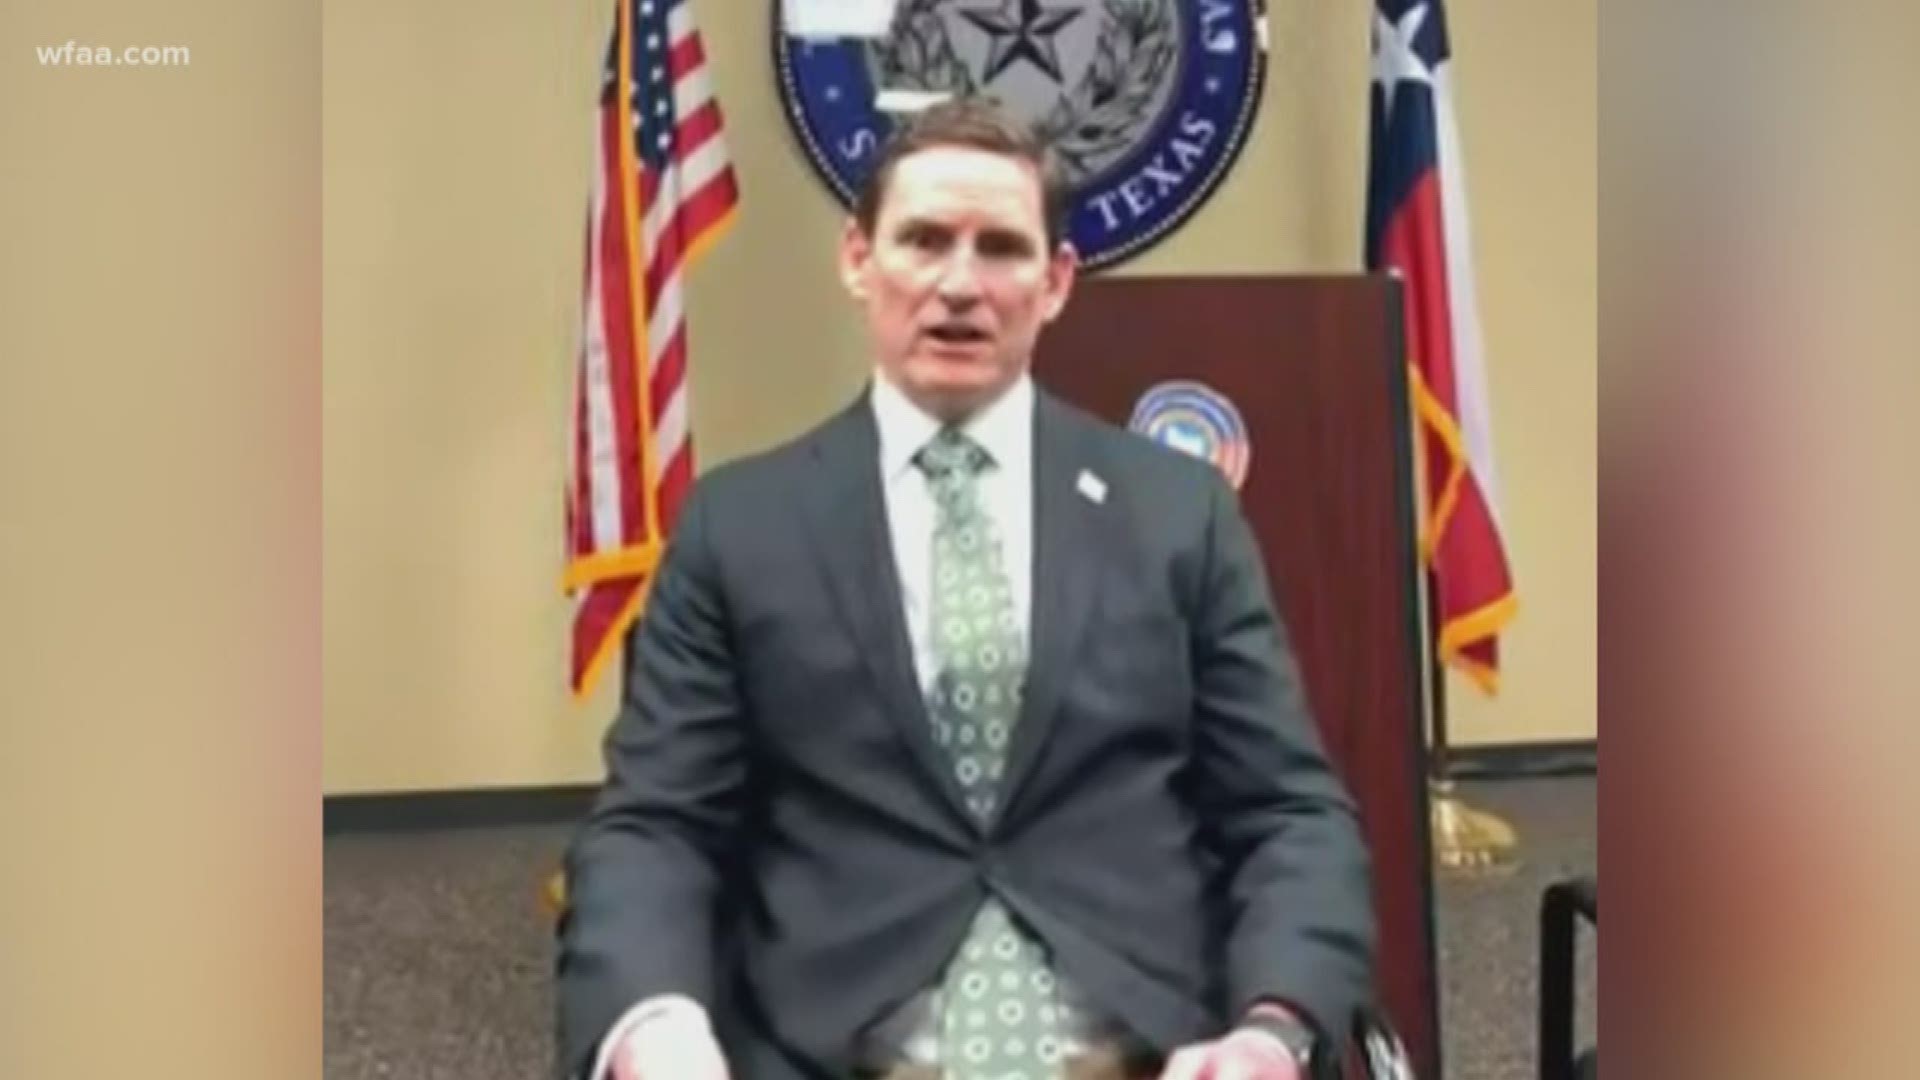 After an increase in community spread of Covid-19, including two in young patients, Judge Clay Jenkins says Gov. Greg Abbott must take aggressive statewide action.